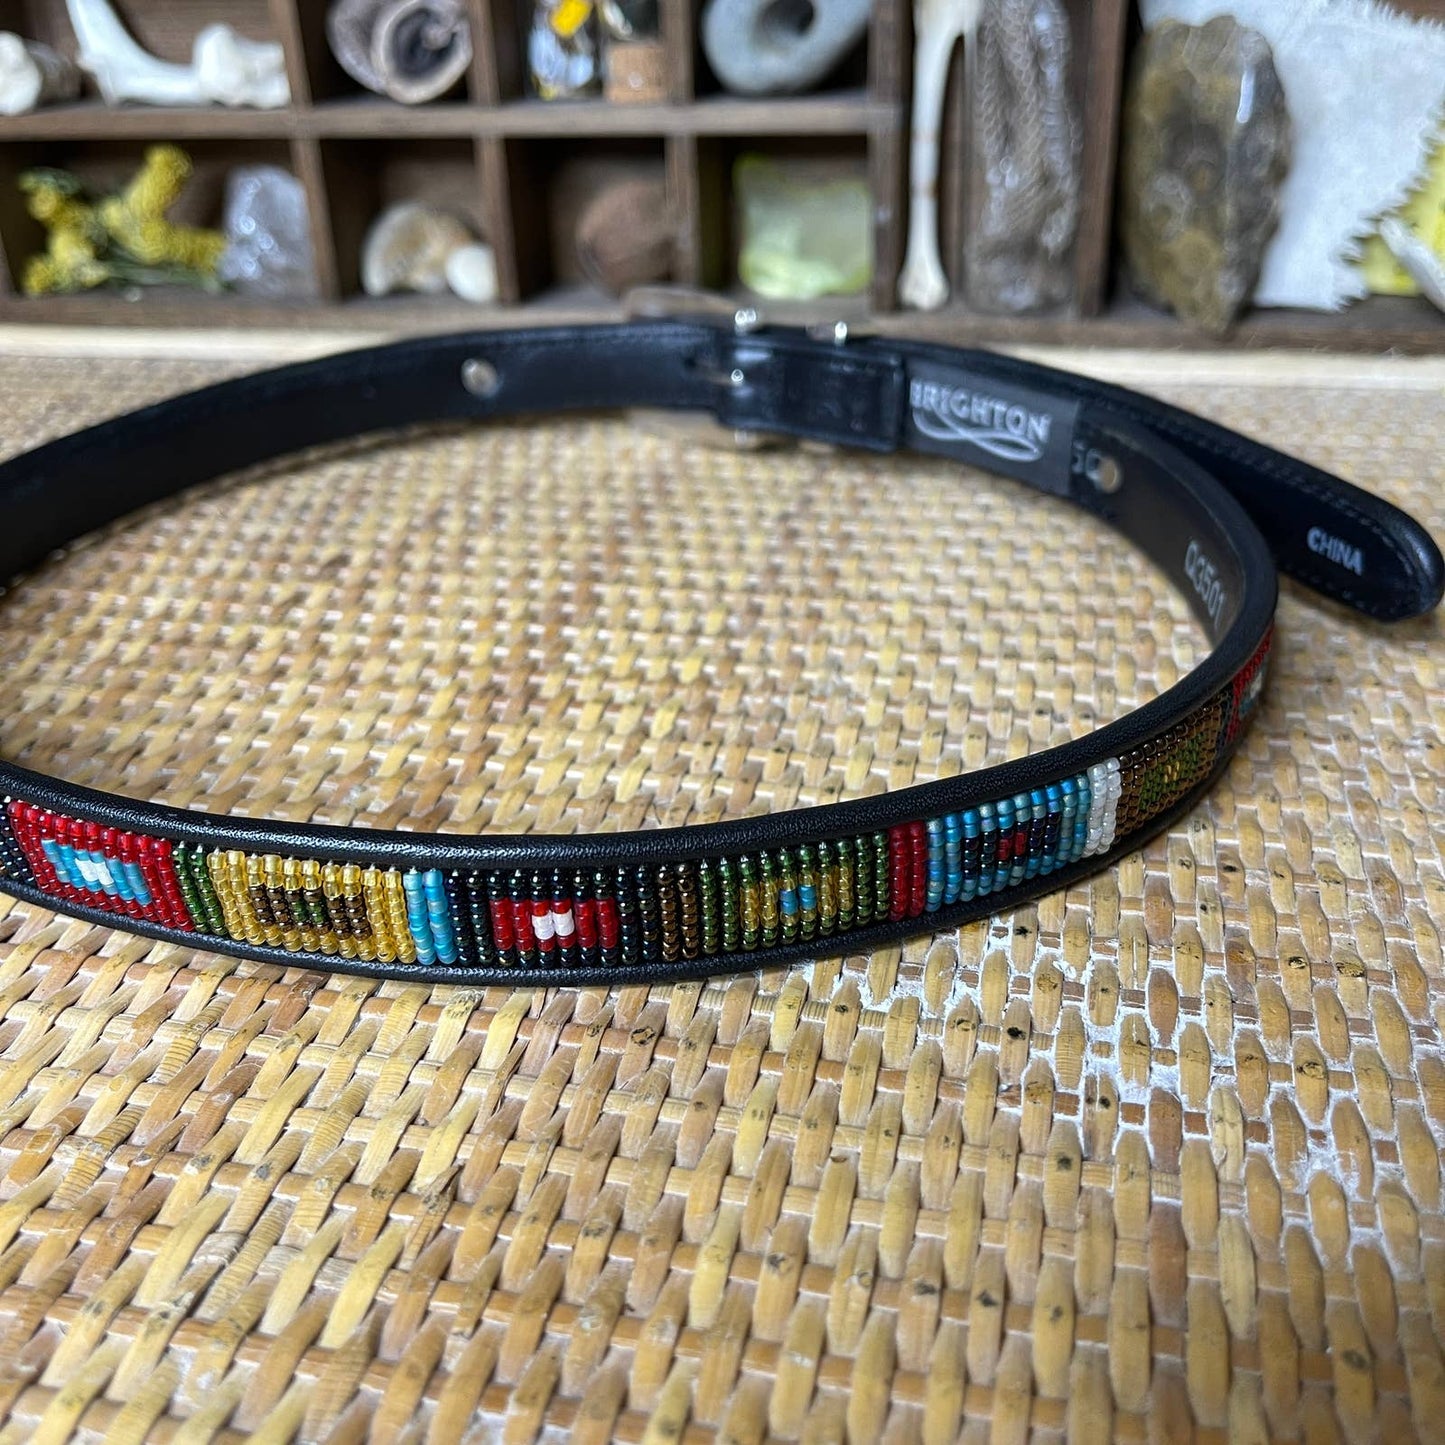 Vintage 90s Black Leather Belt with Beaded Geometric Design by Brighton Size S